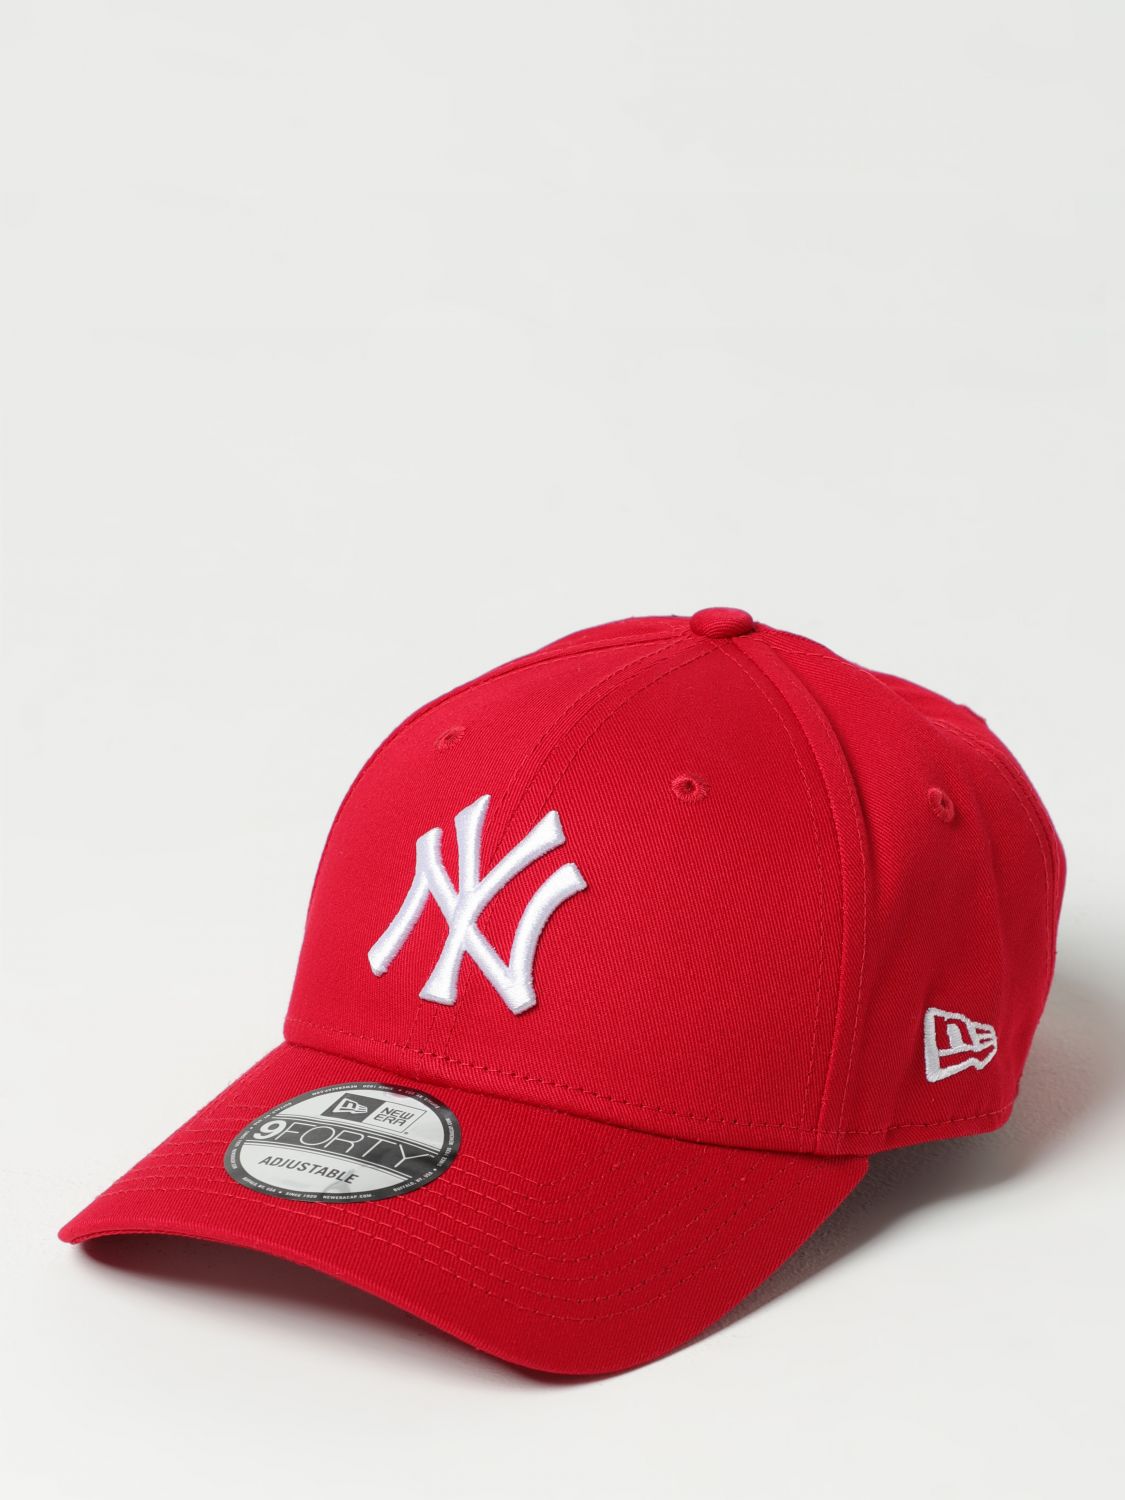 NEW ERA: hat for man - Red  New Era hat 10531938 online at